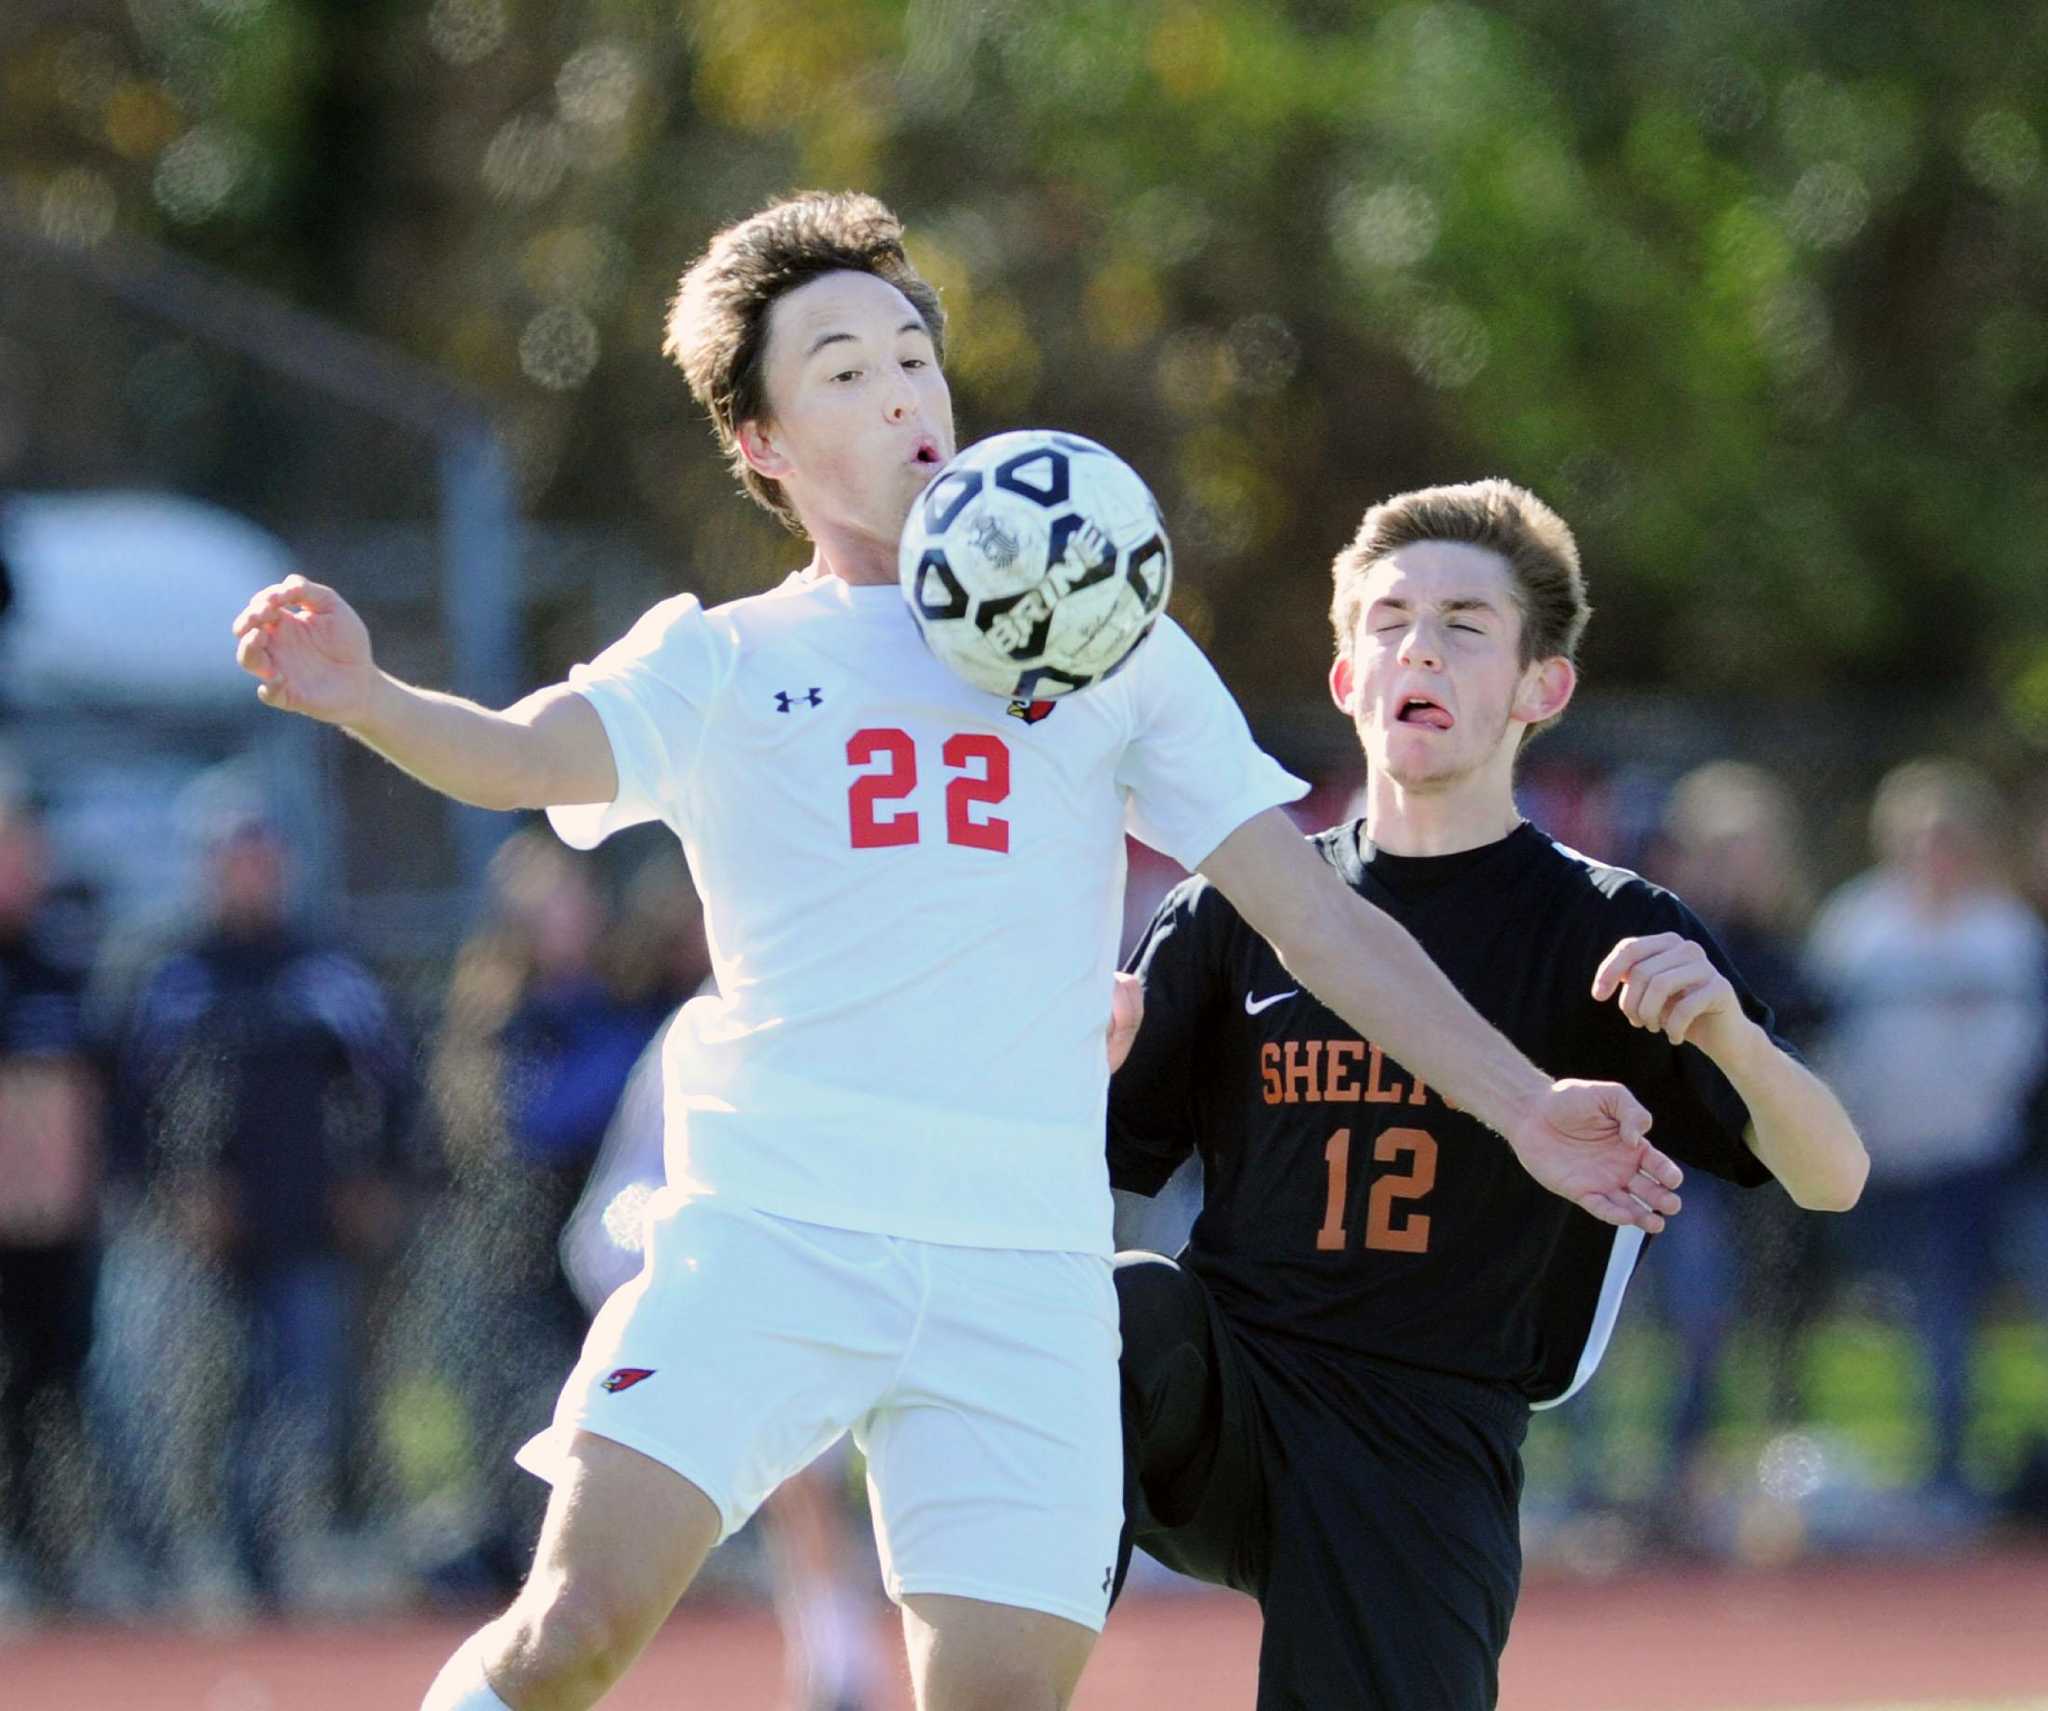 Hearst Connecticut Media Boys Soccer MVP: MacLean helps lead Greenwich to a share of FCIAC title - Greenwich Time